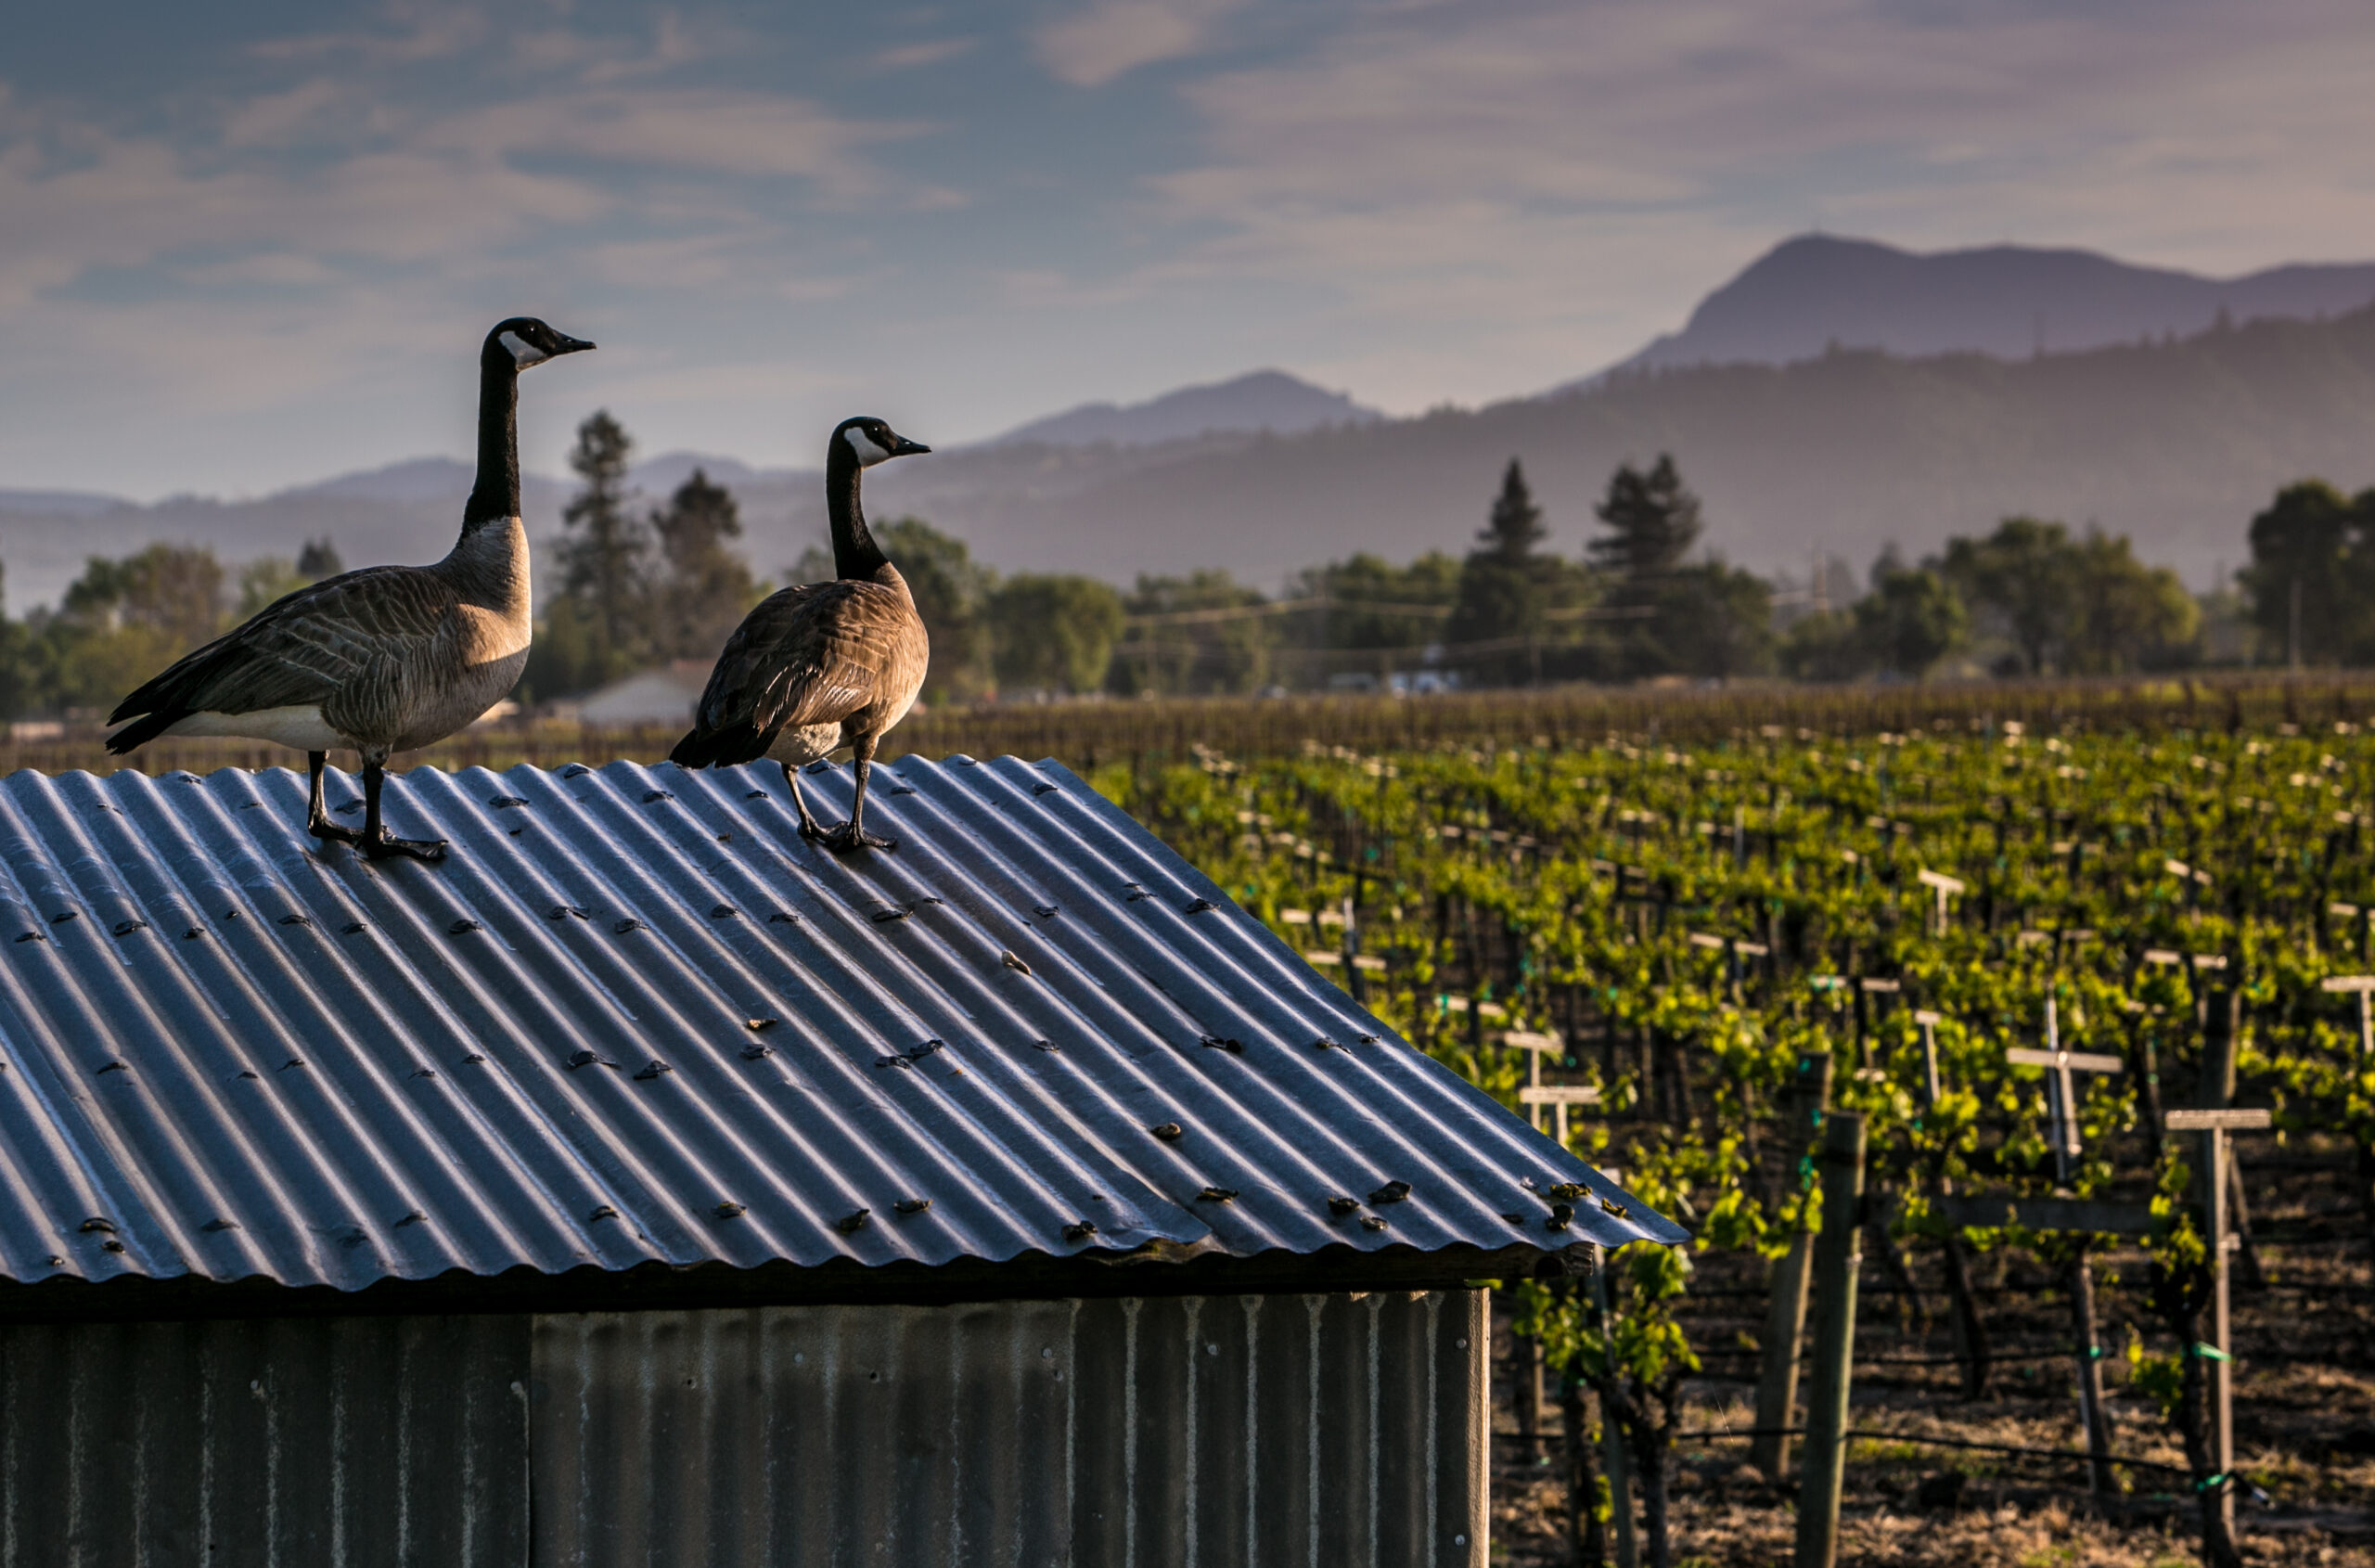 Two geese standing atop a shed on a vineyard property